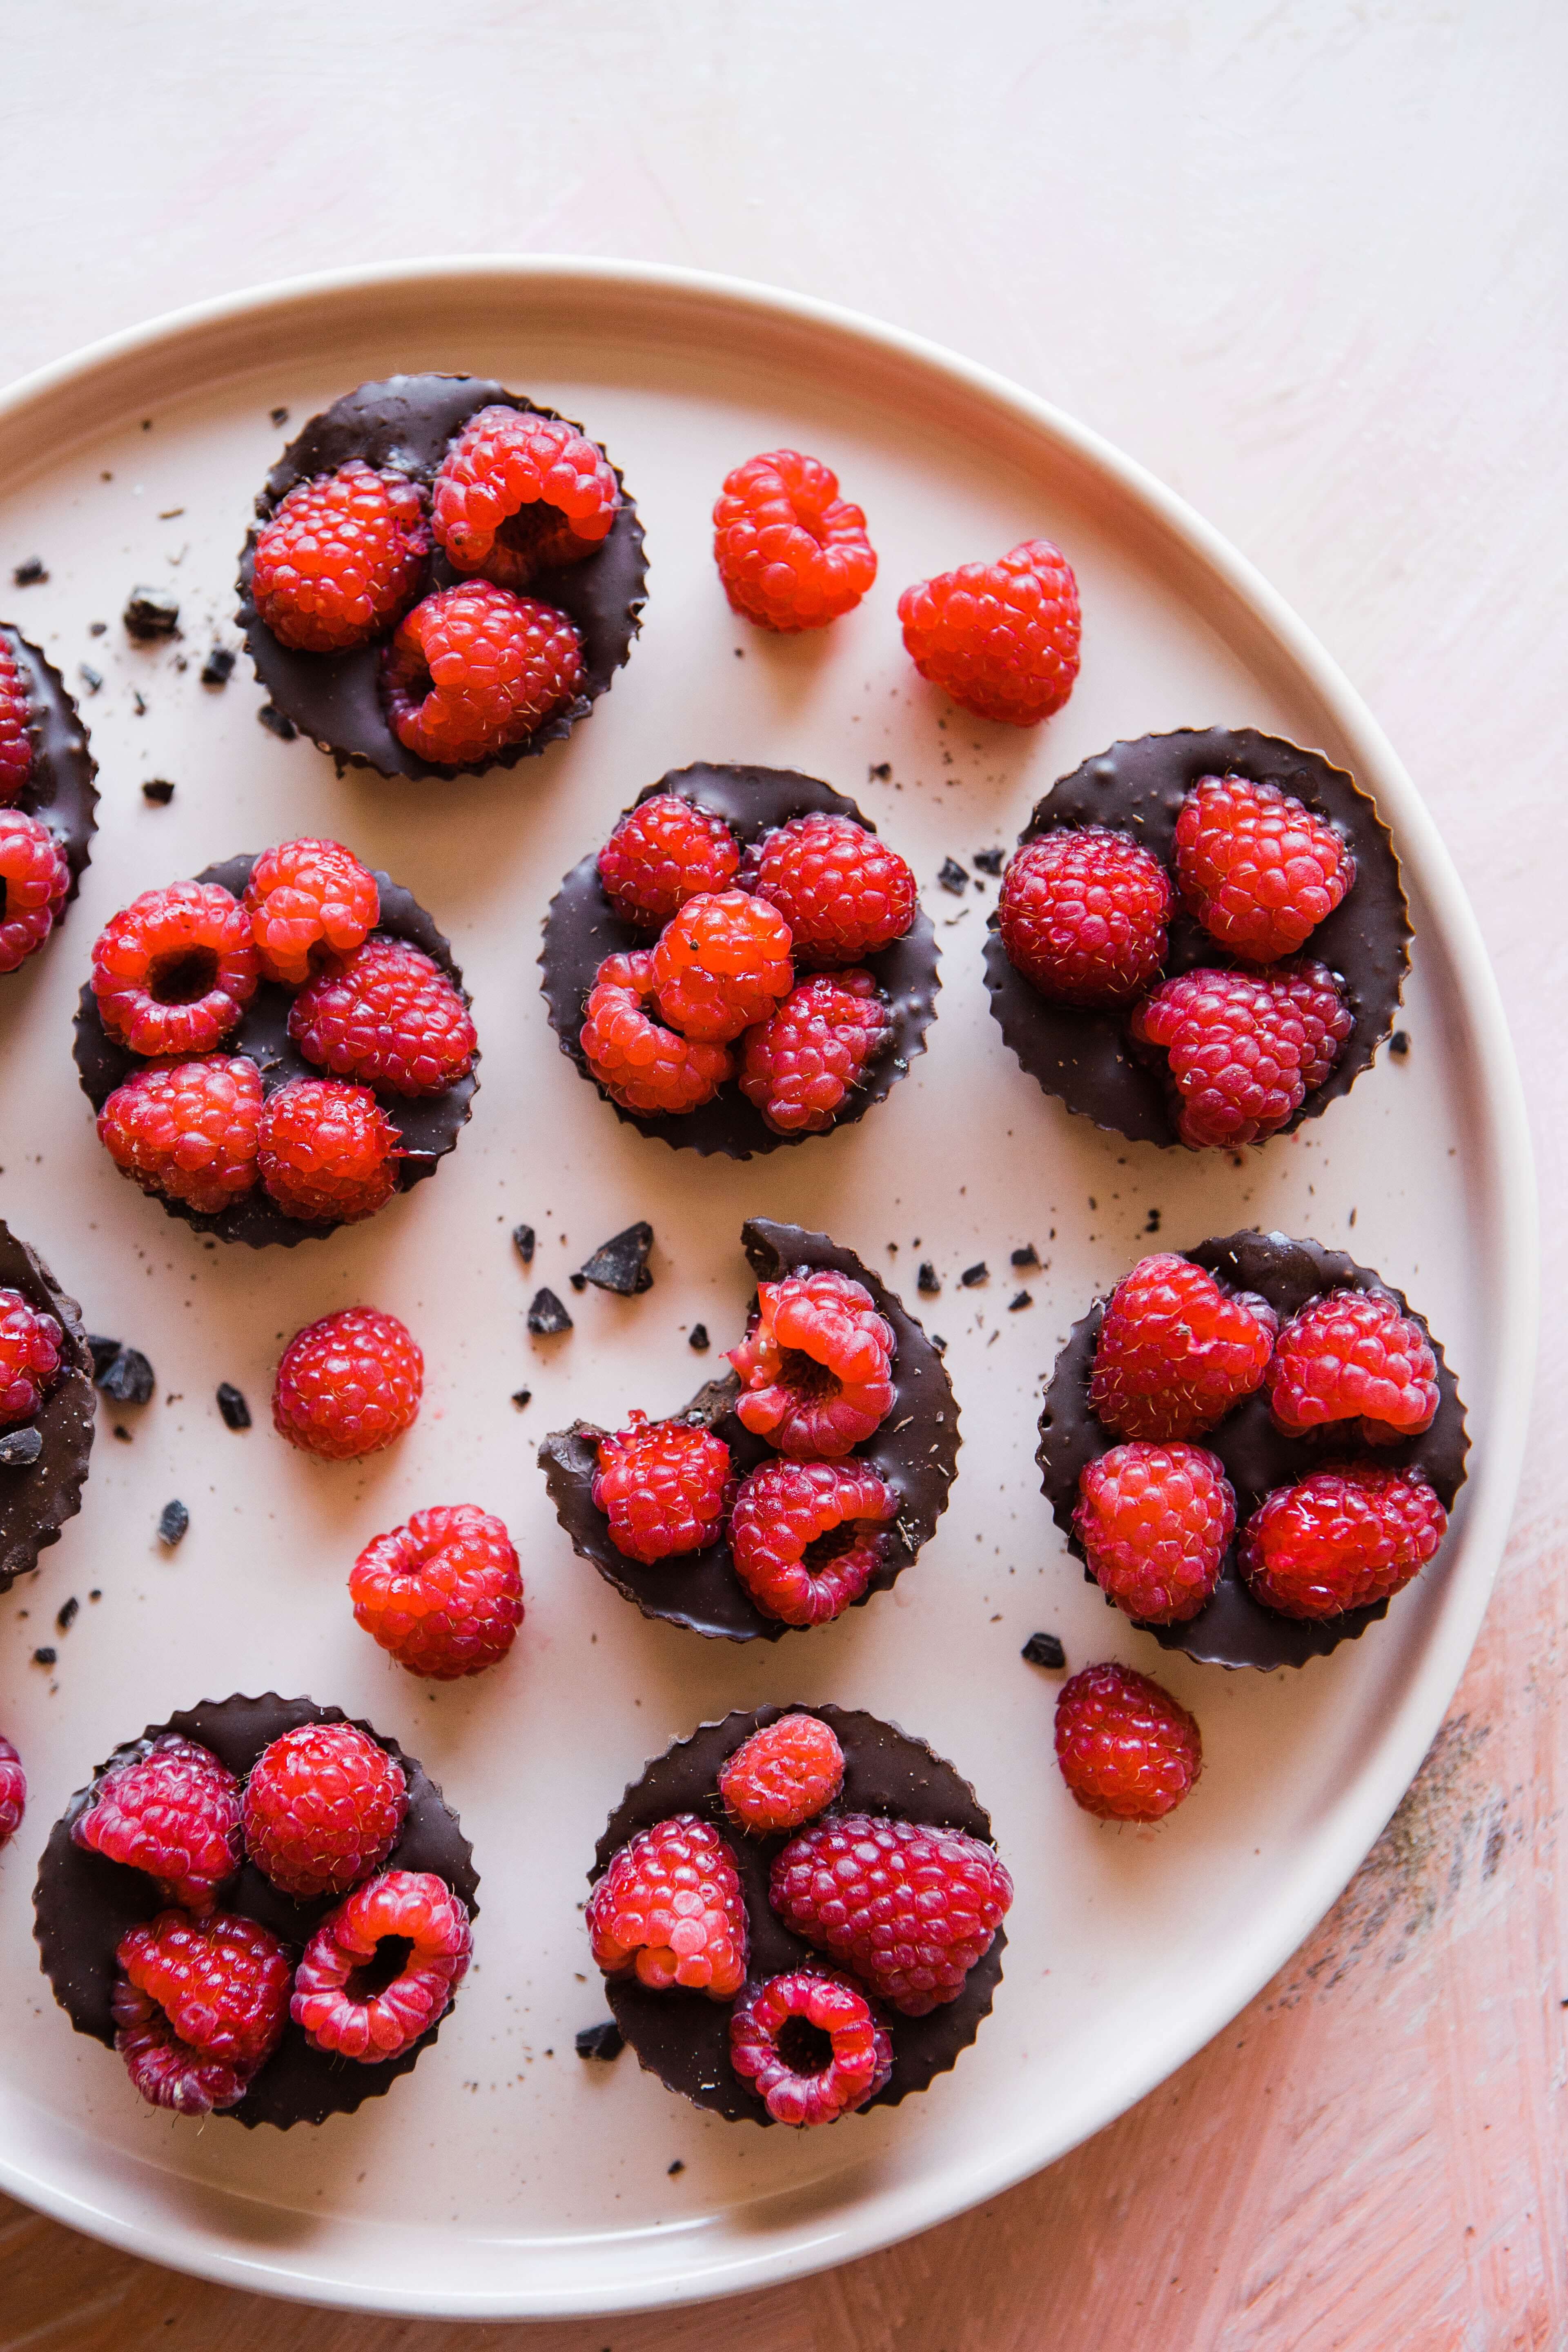 Delicious red raspberries atop chocolate pastries in a serving dish.